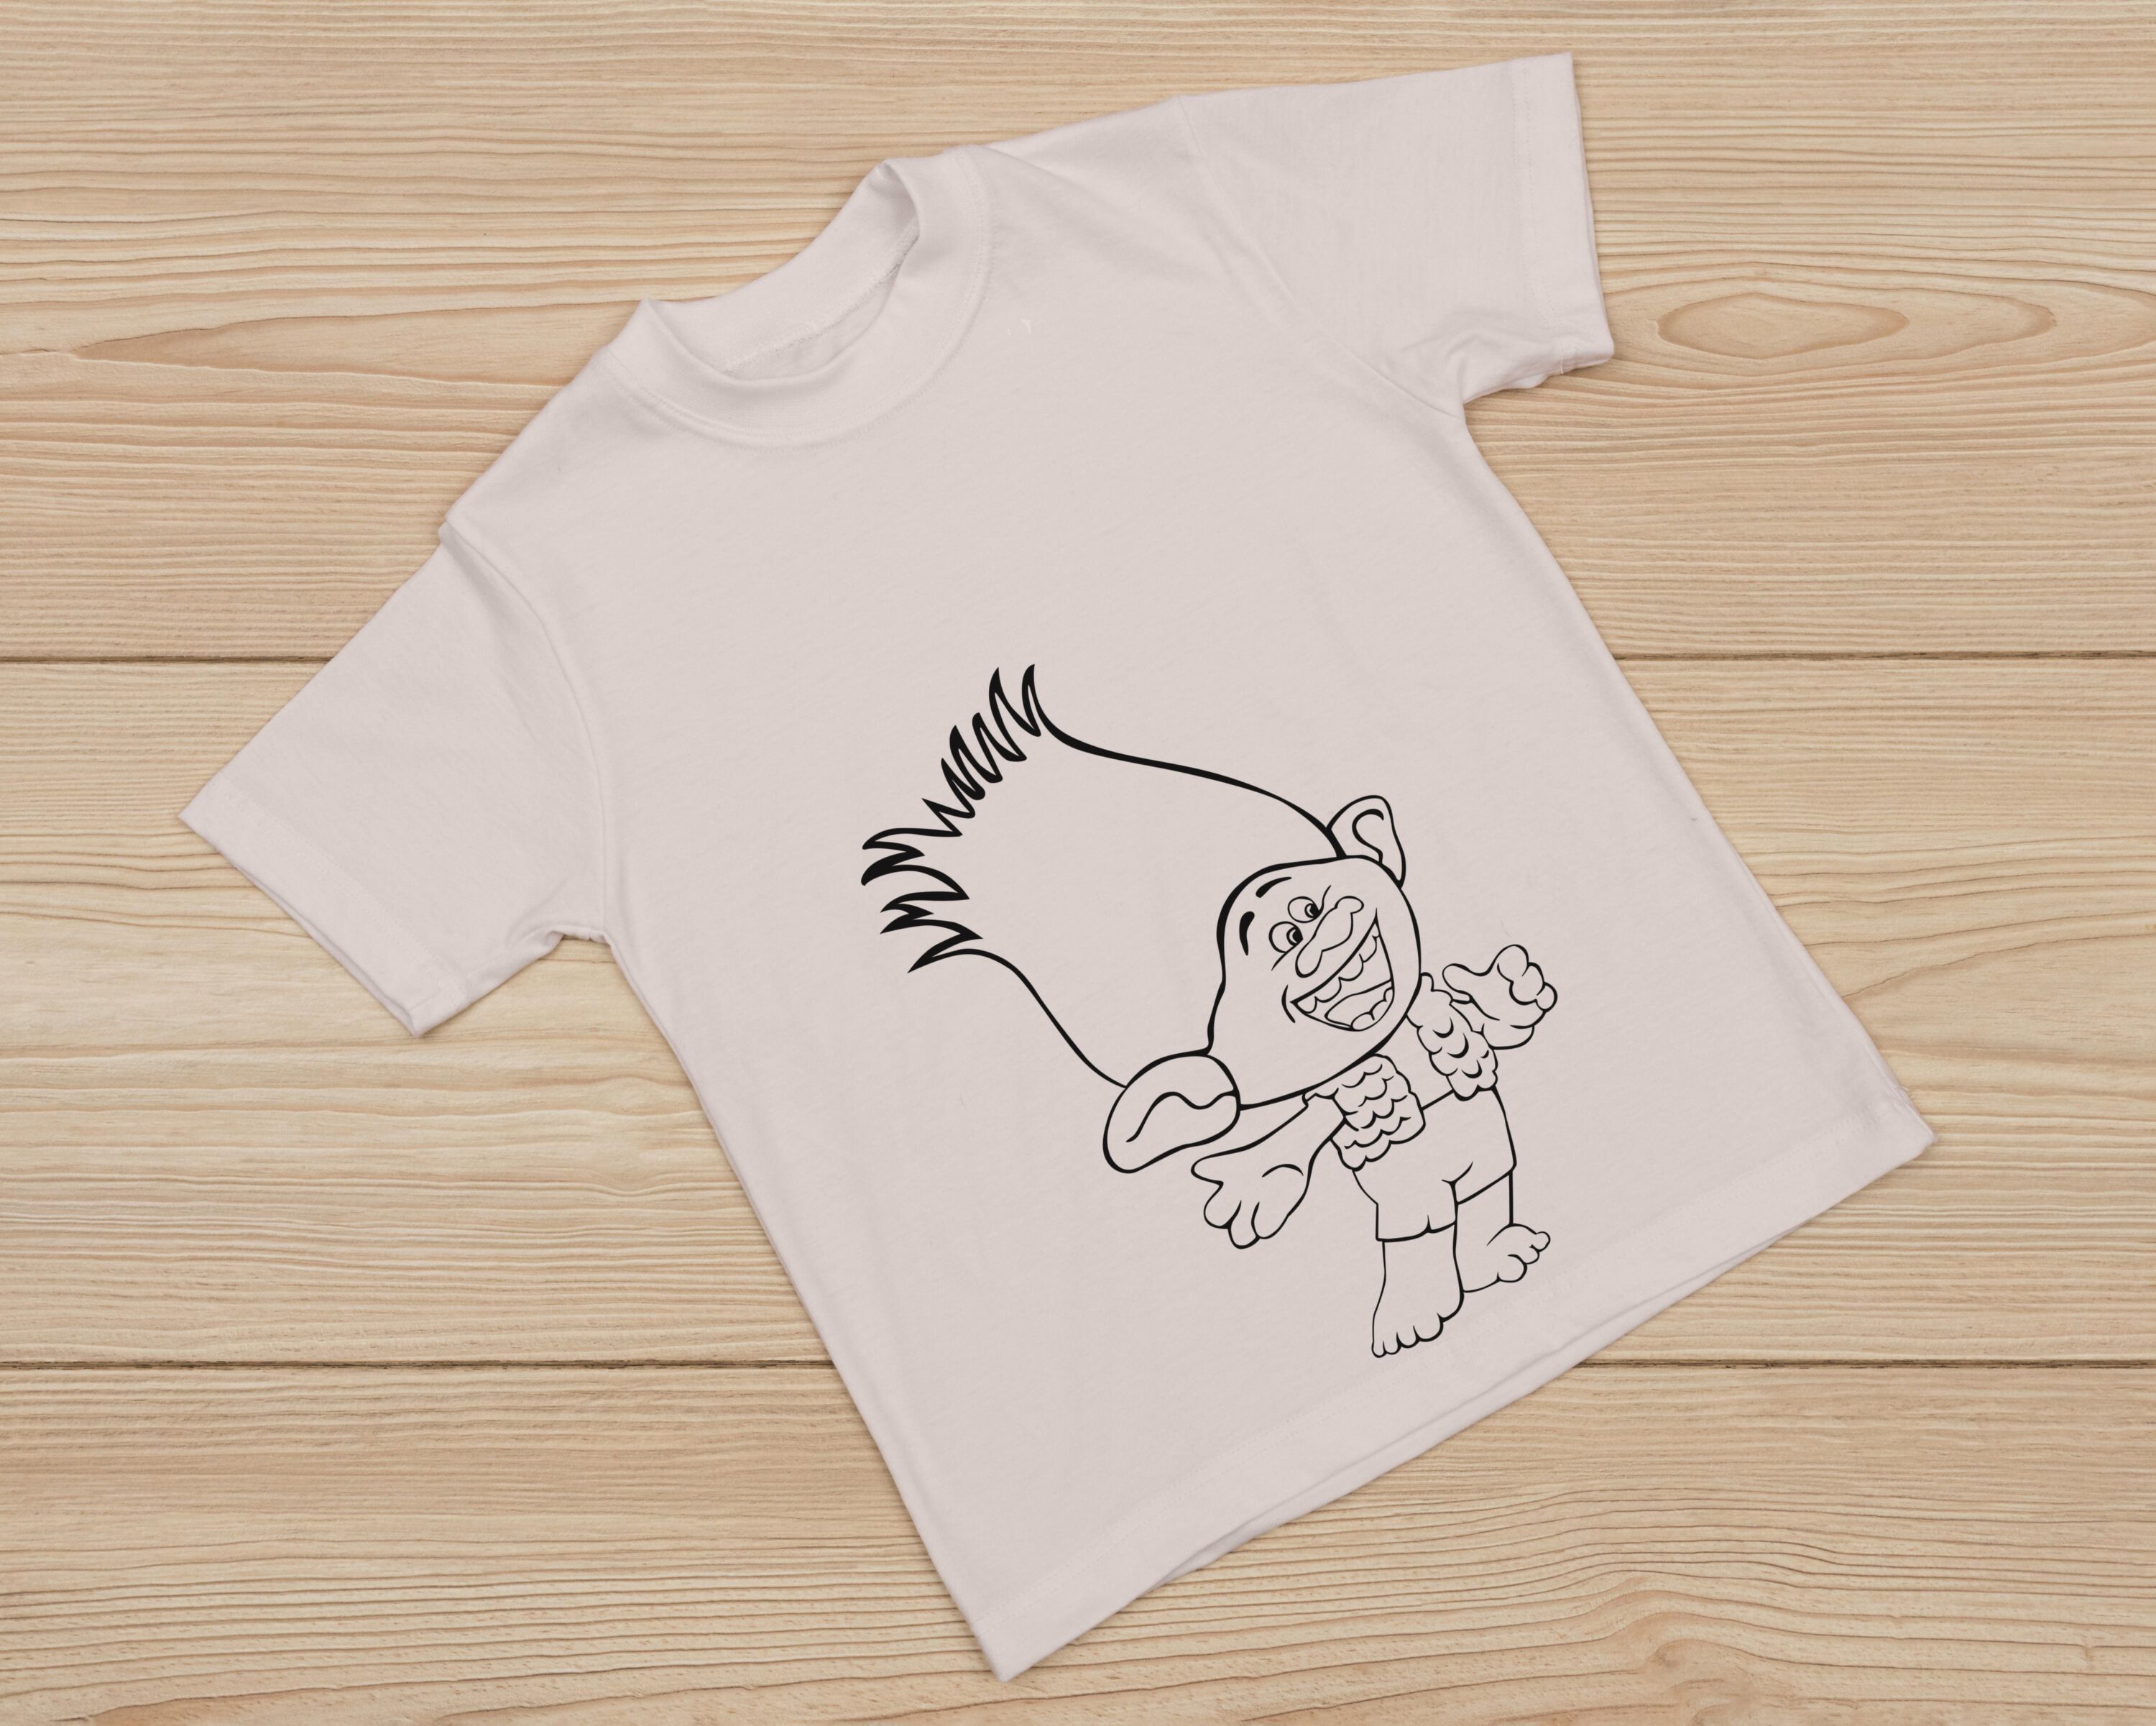 White T-shirt with a black outline of a cartoon character - Branch.